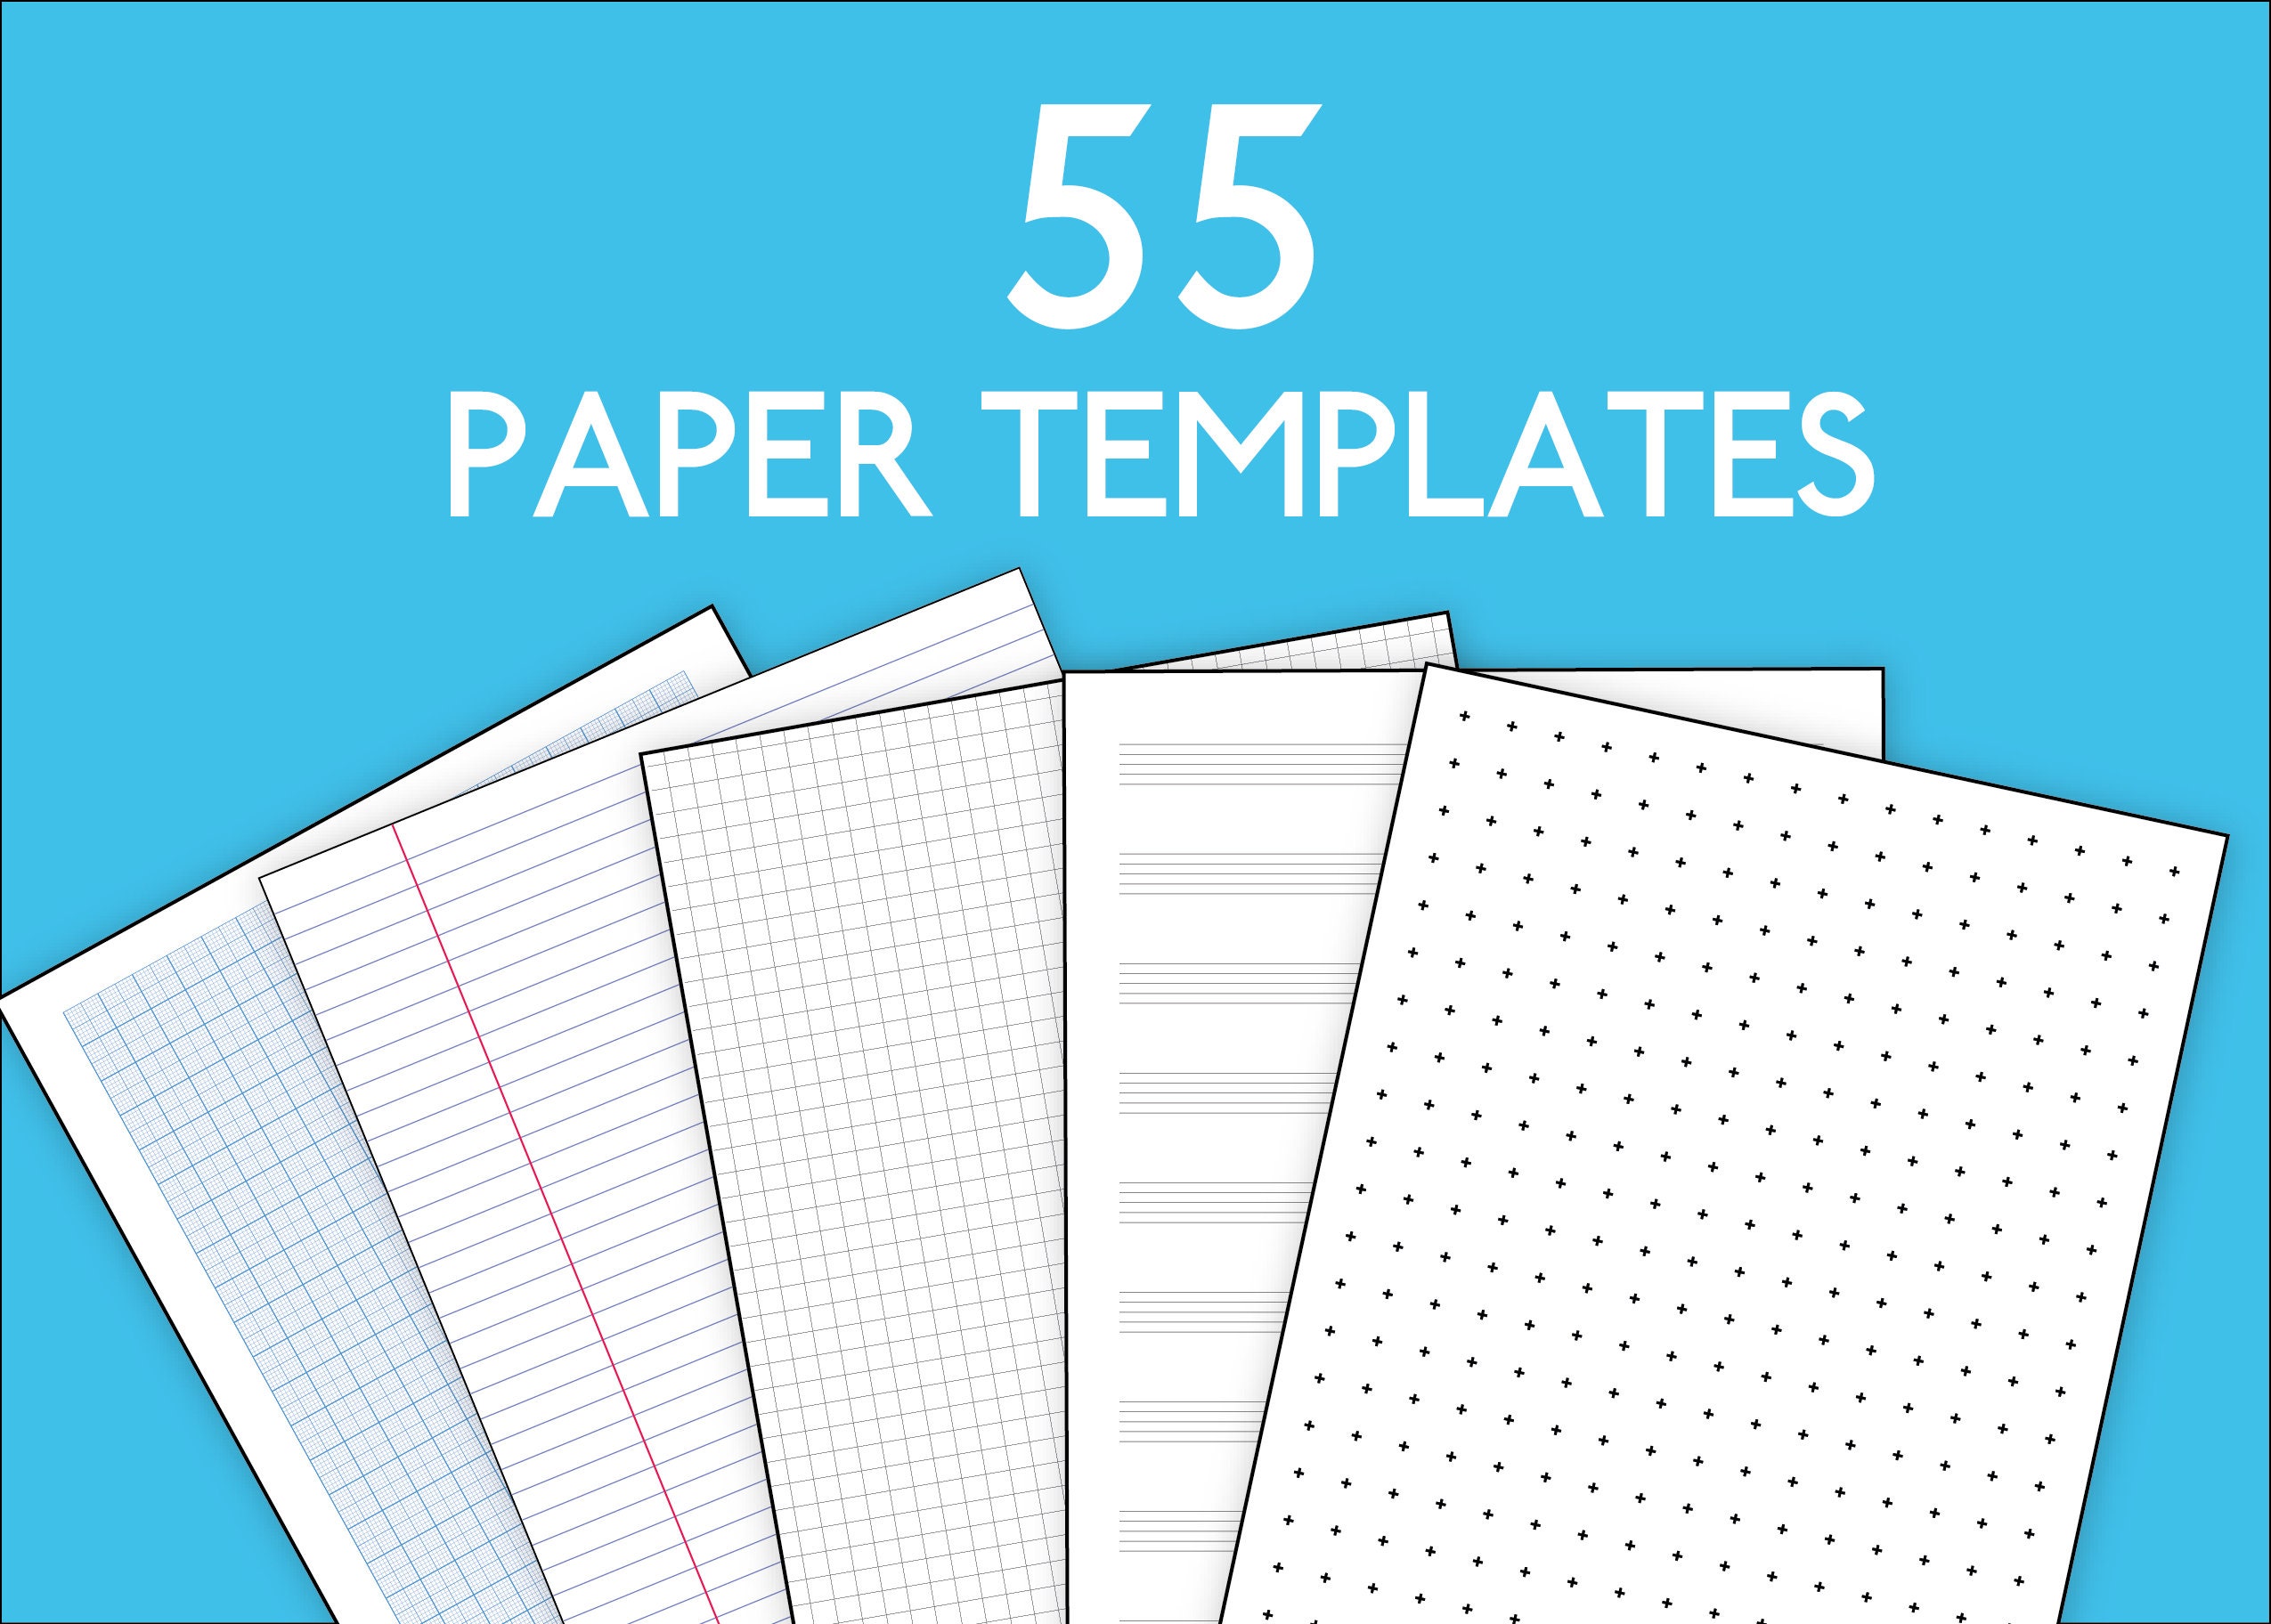 Dotted Grid Paper Template,Lined Paper Graphic by watercolortheme ·  Creative Fabrica